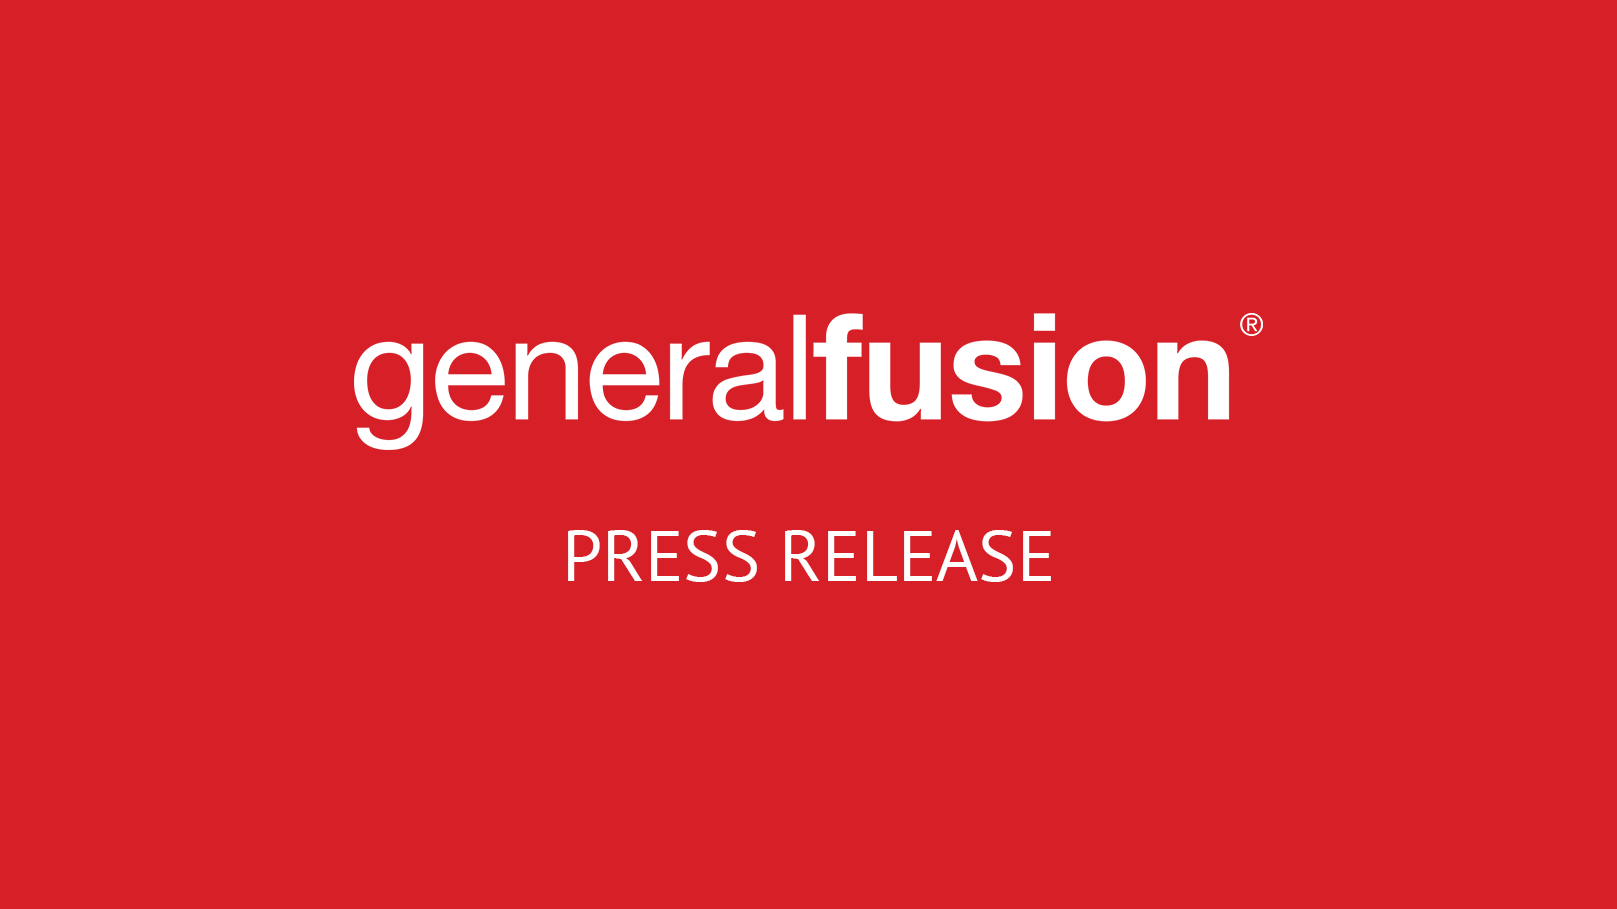 General Fusion and UK Atomic Energy Authority (UKAEA) announce collaborative agreement to advance commercial fusion energy